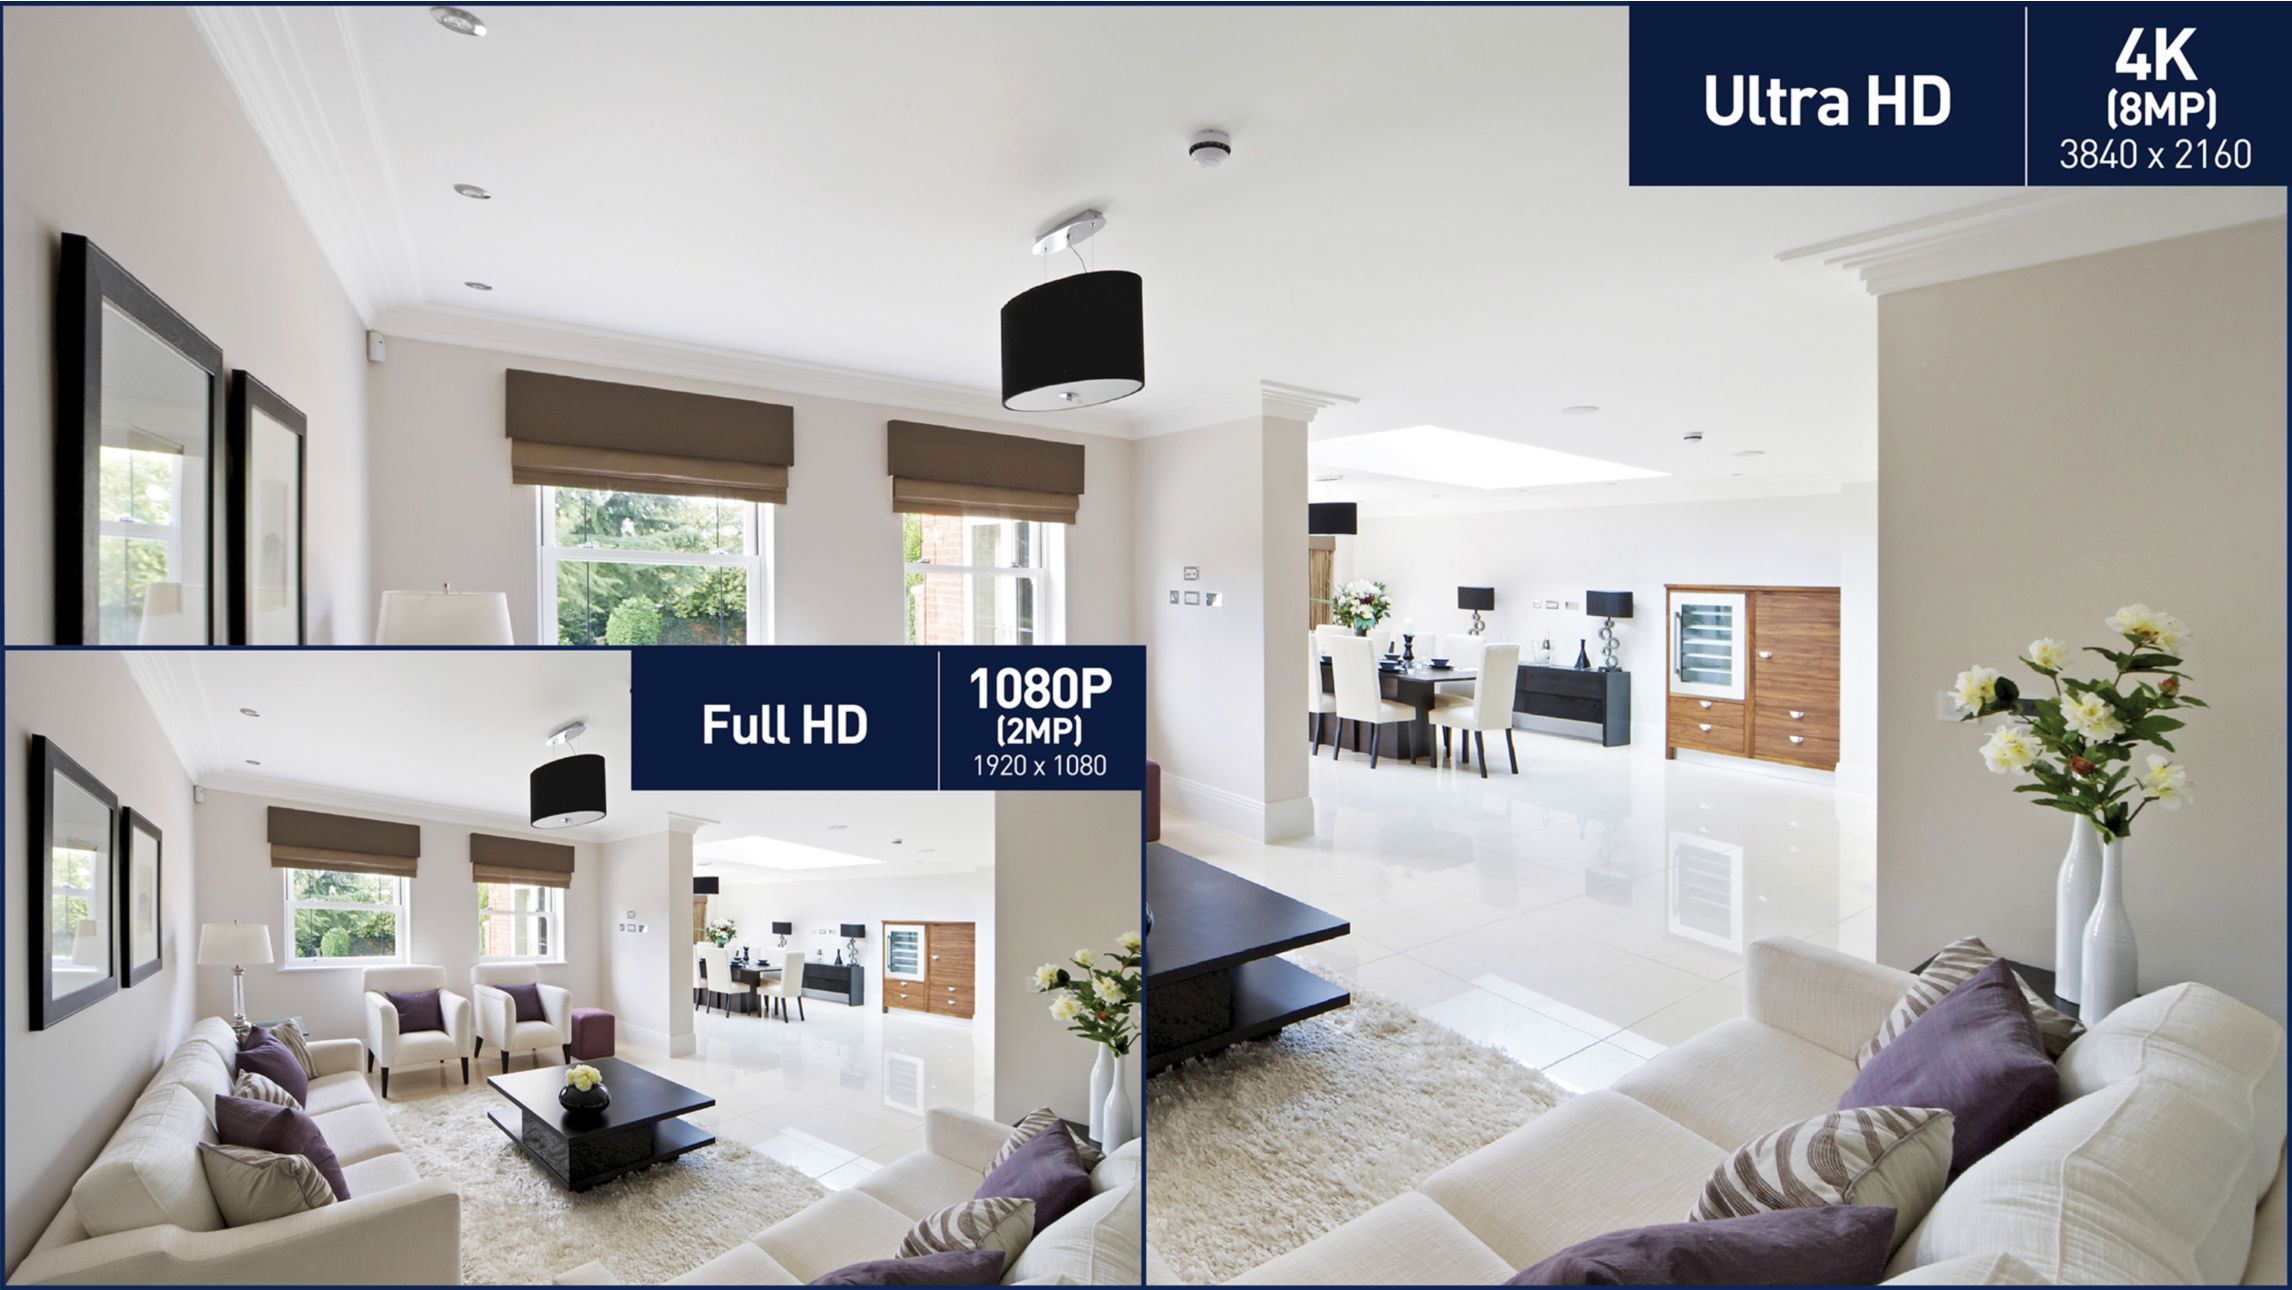 Images of Difference Between Ultra HD & Full HD